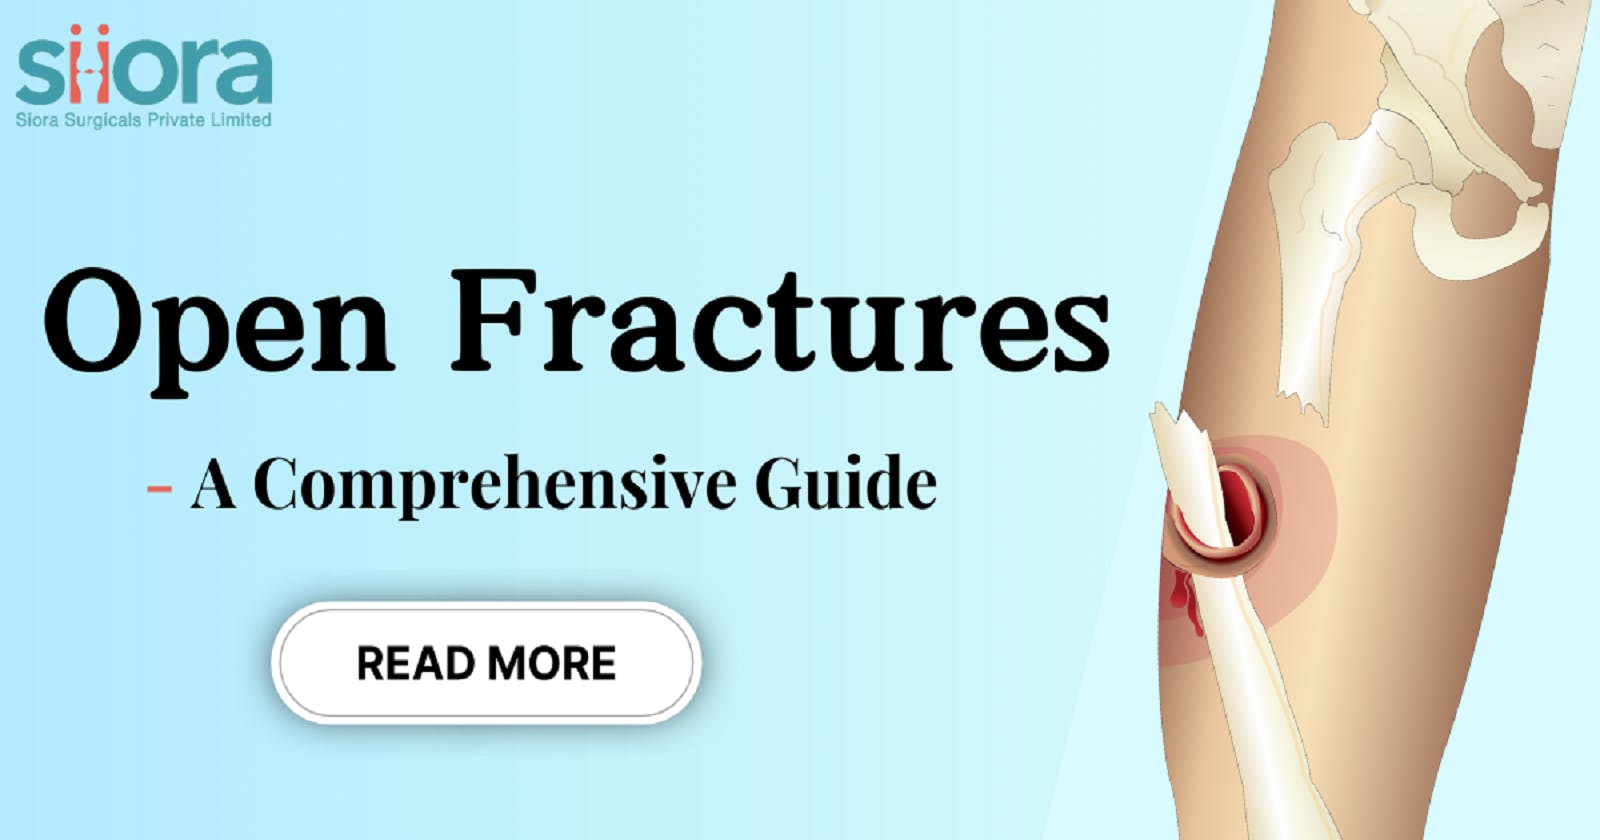 Open Fractures - A Comprehensive Guide